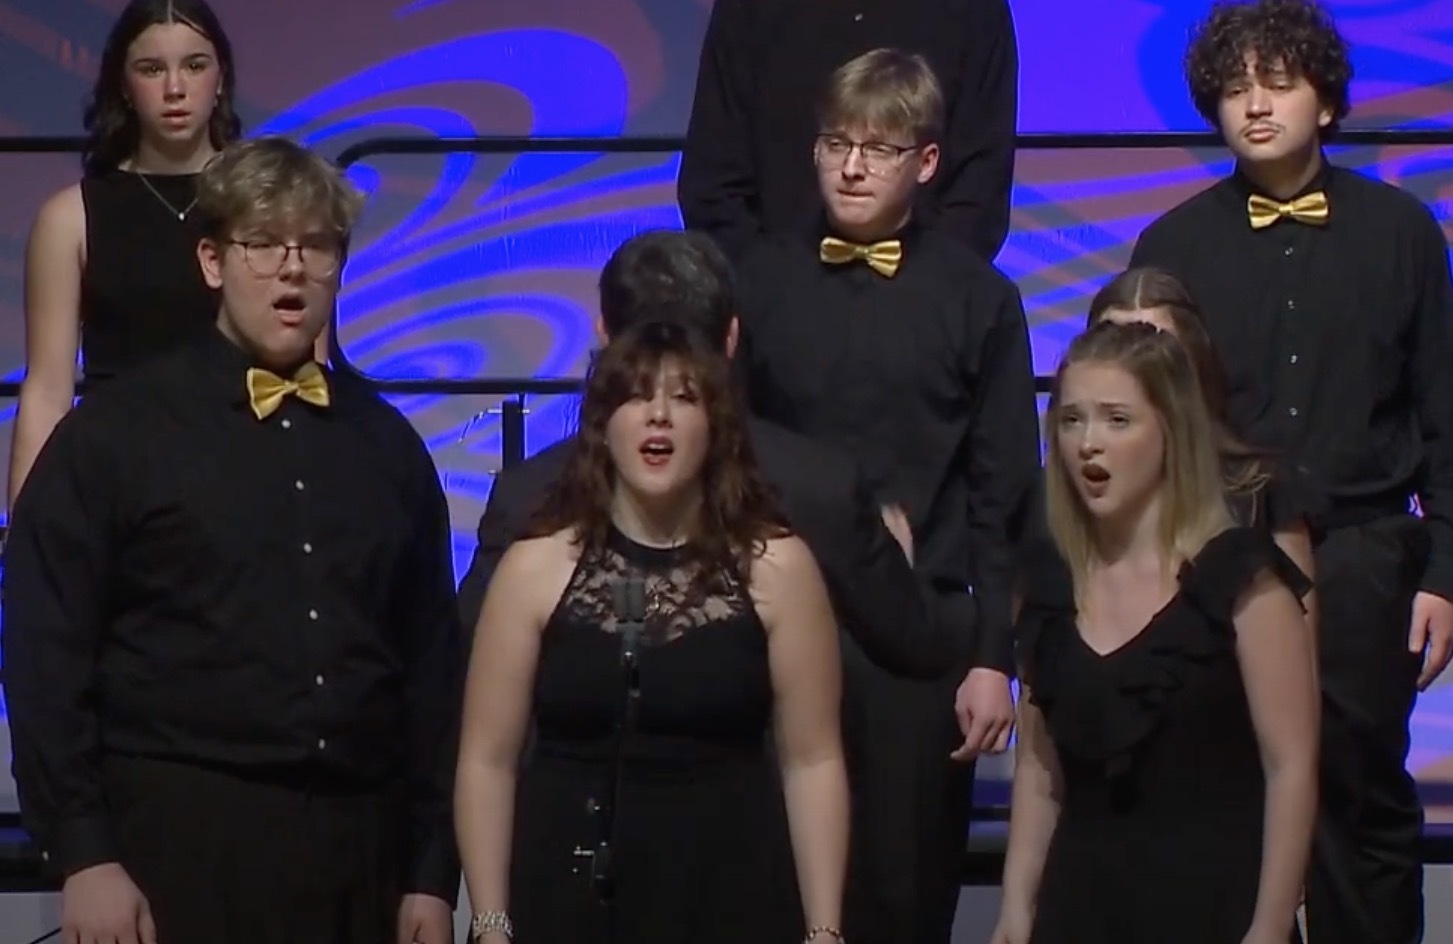 Blue valley chorale perf